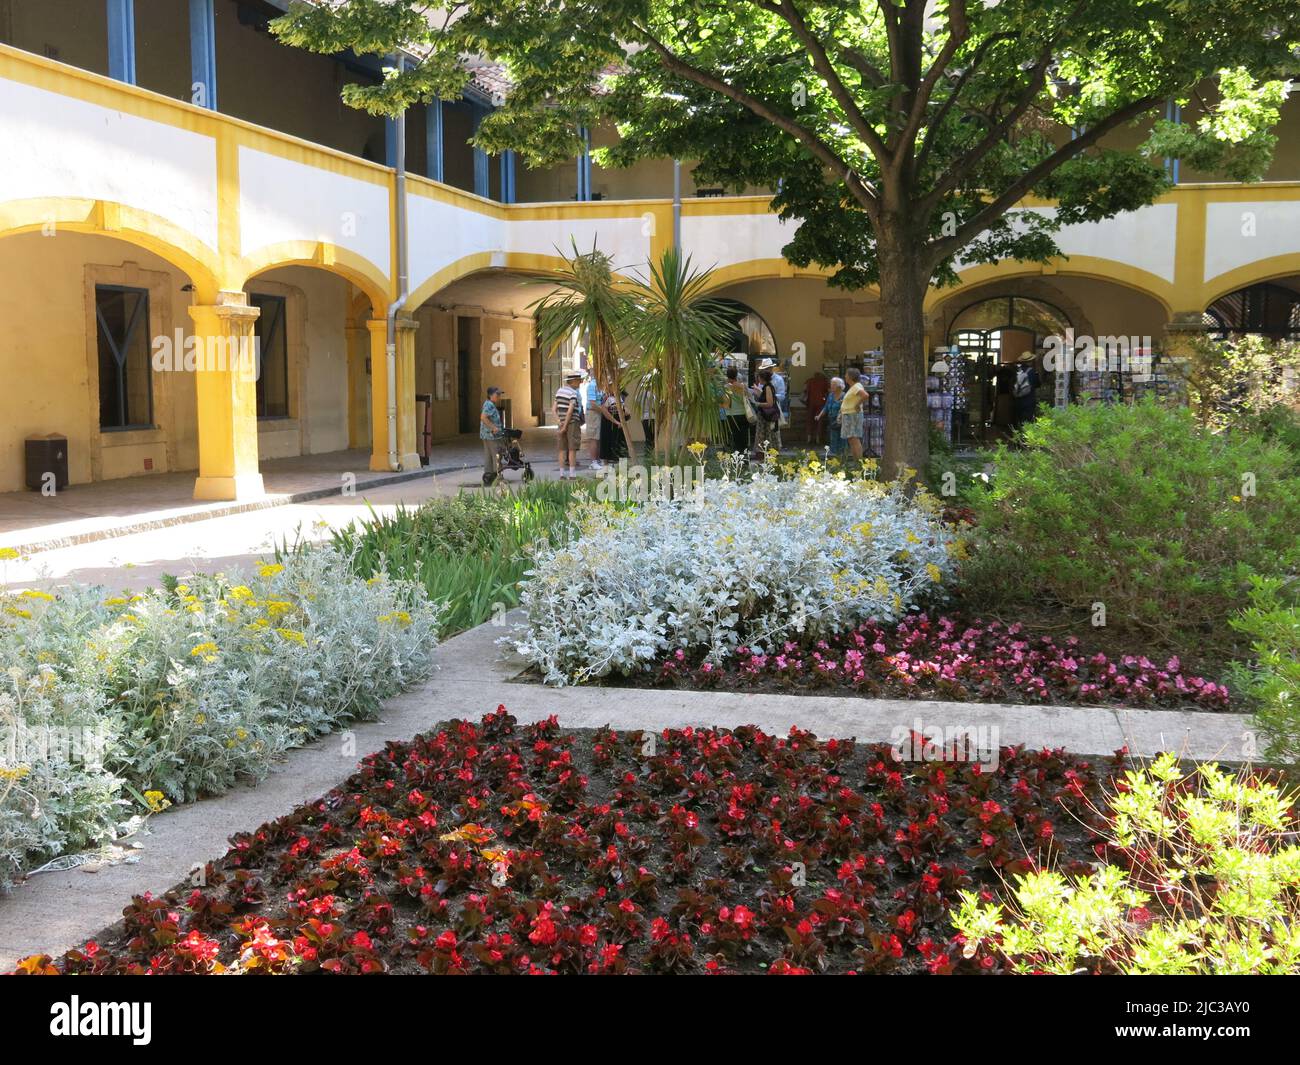 After painting the garden & distinctive yellow arches at the hospital in Arles in 1889, the colourful courtyard is preserved as the Espace Van Gogh. Stock Photo